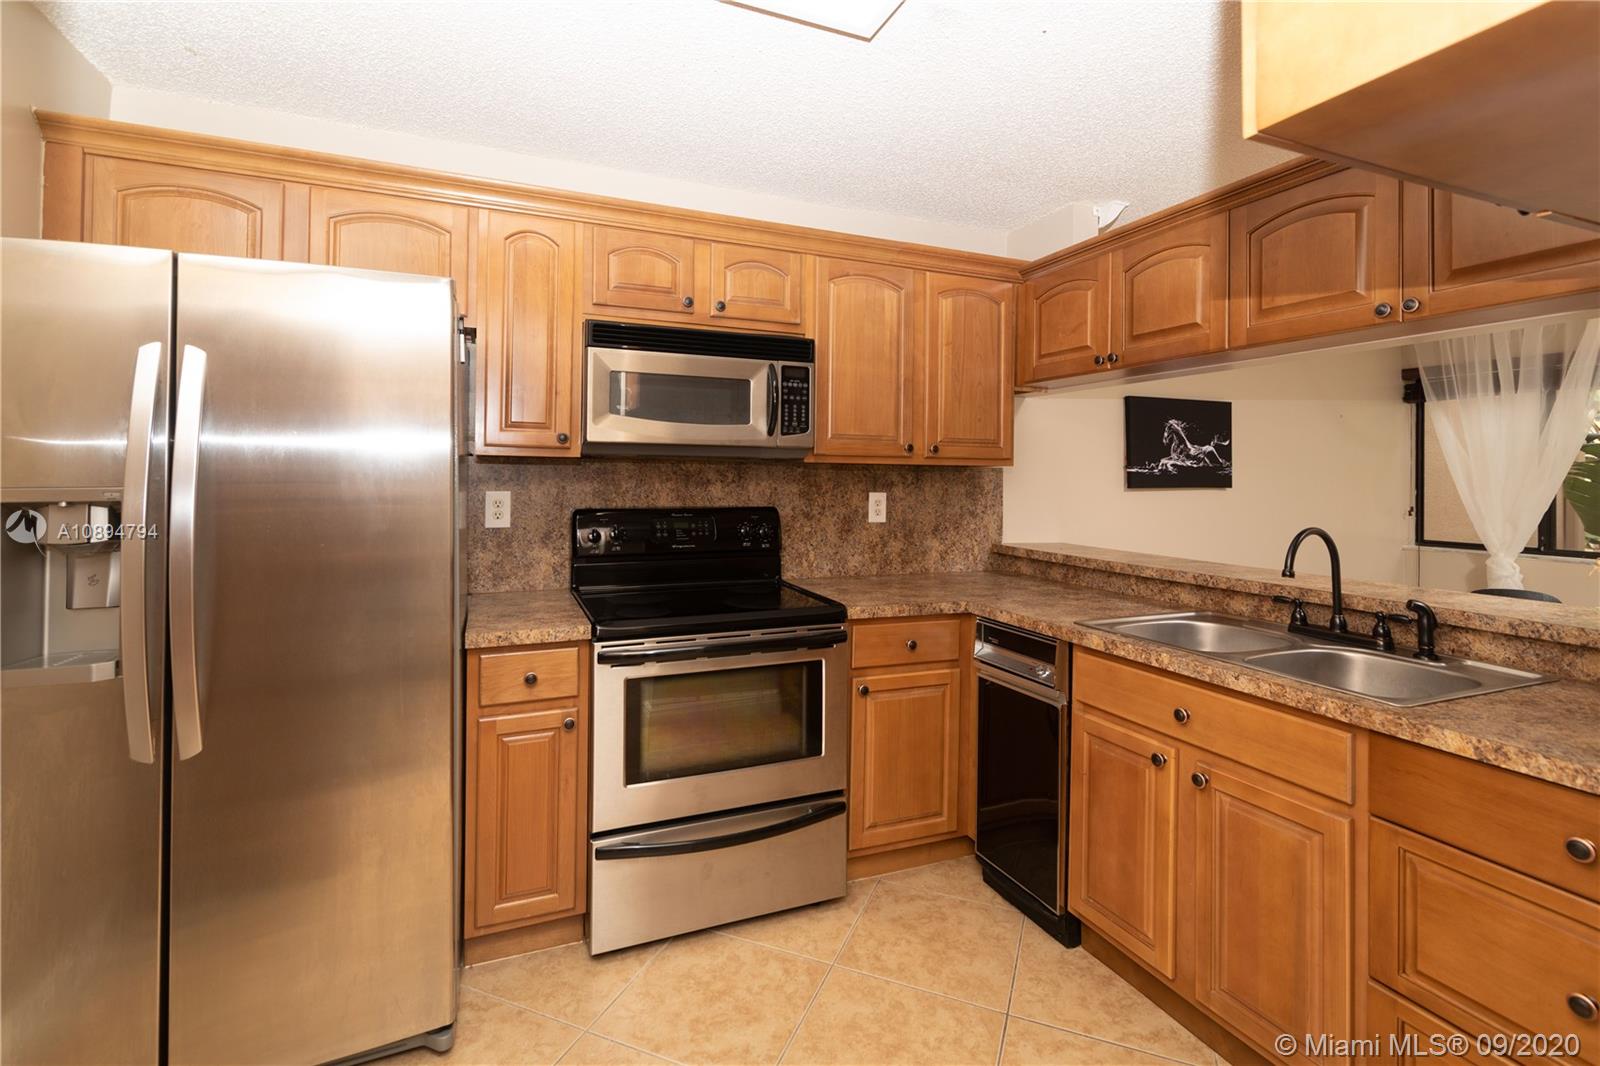 a kitchen with stainless steel appliances granite countertop a refrigerator stove top oven a sink and dishwasher